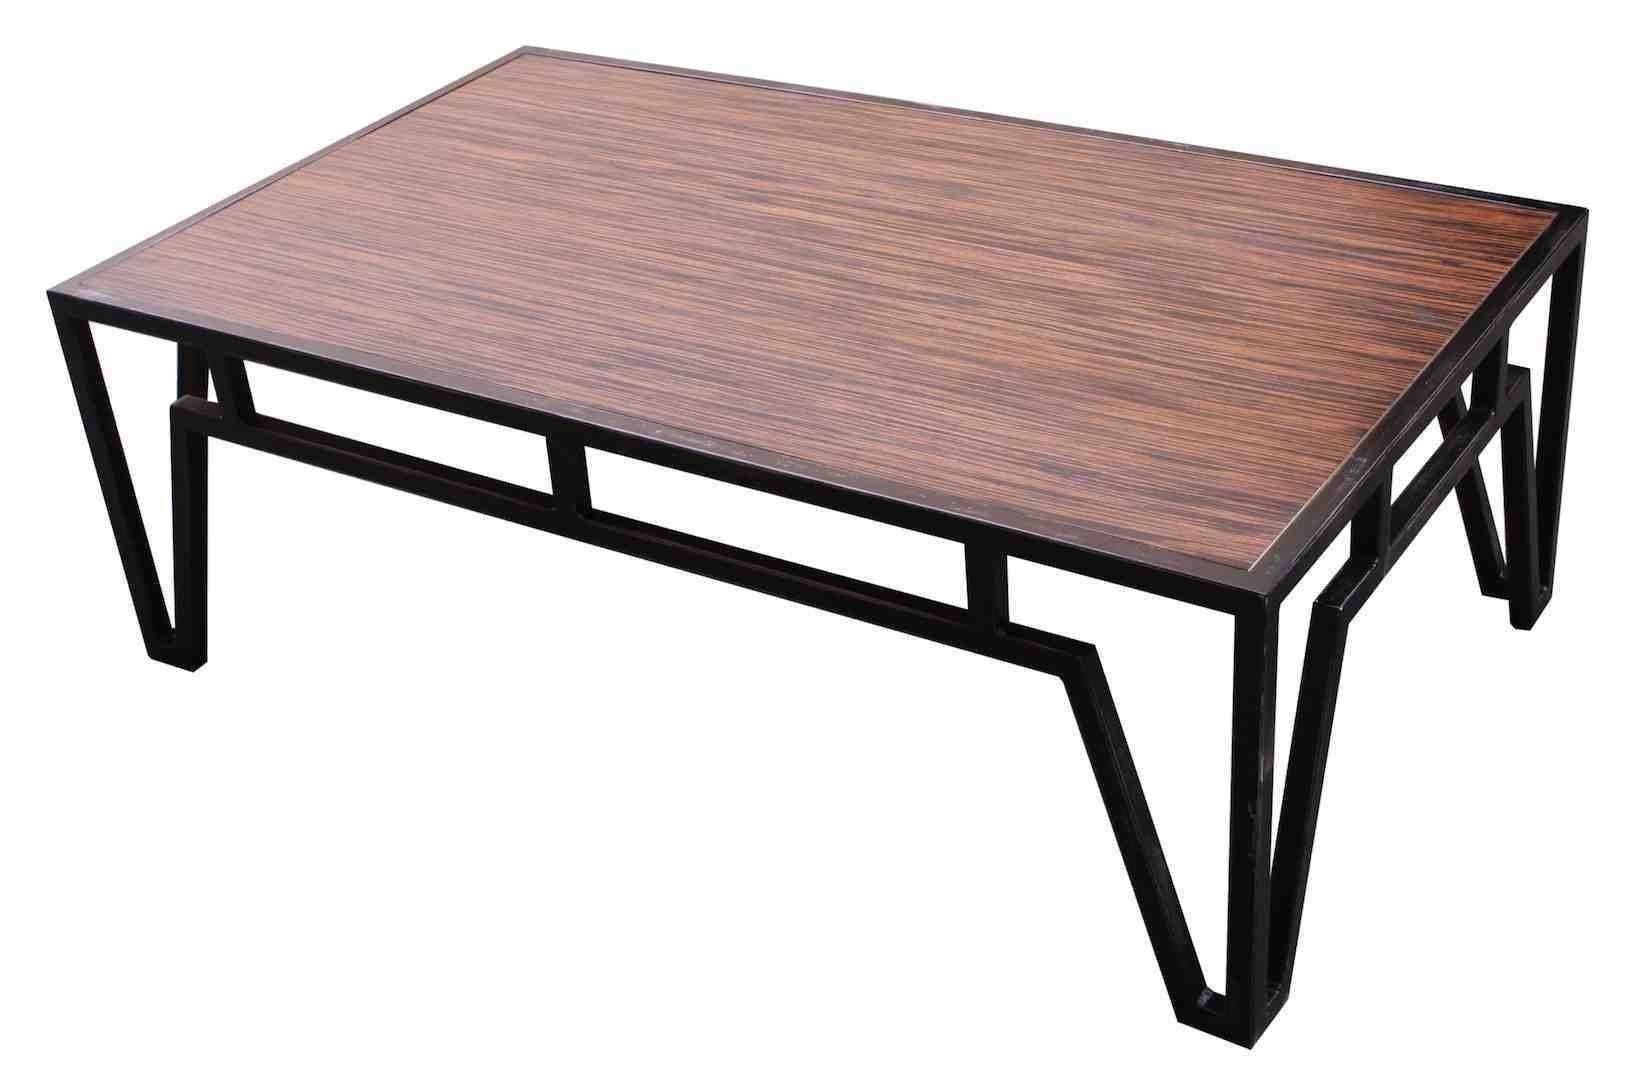 Wood And Steel Coffee Table – Karimbilal Inside Joss And Main Coffee Tables (View 30 of 30)